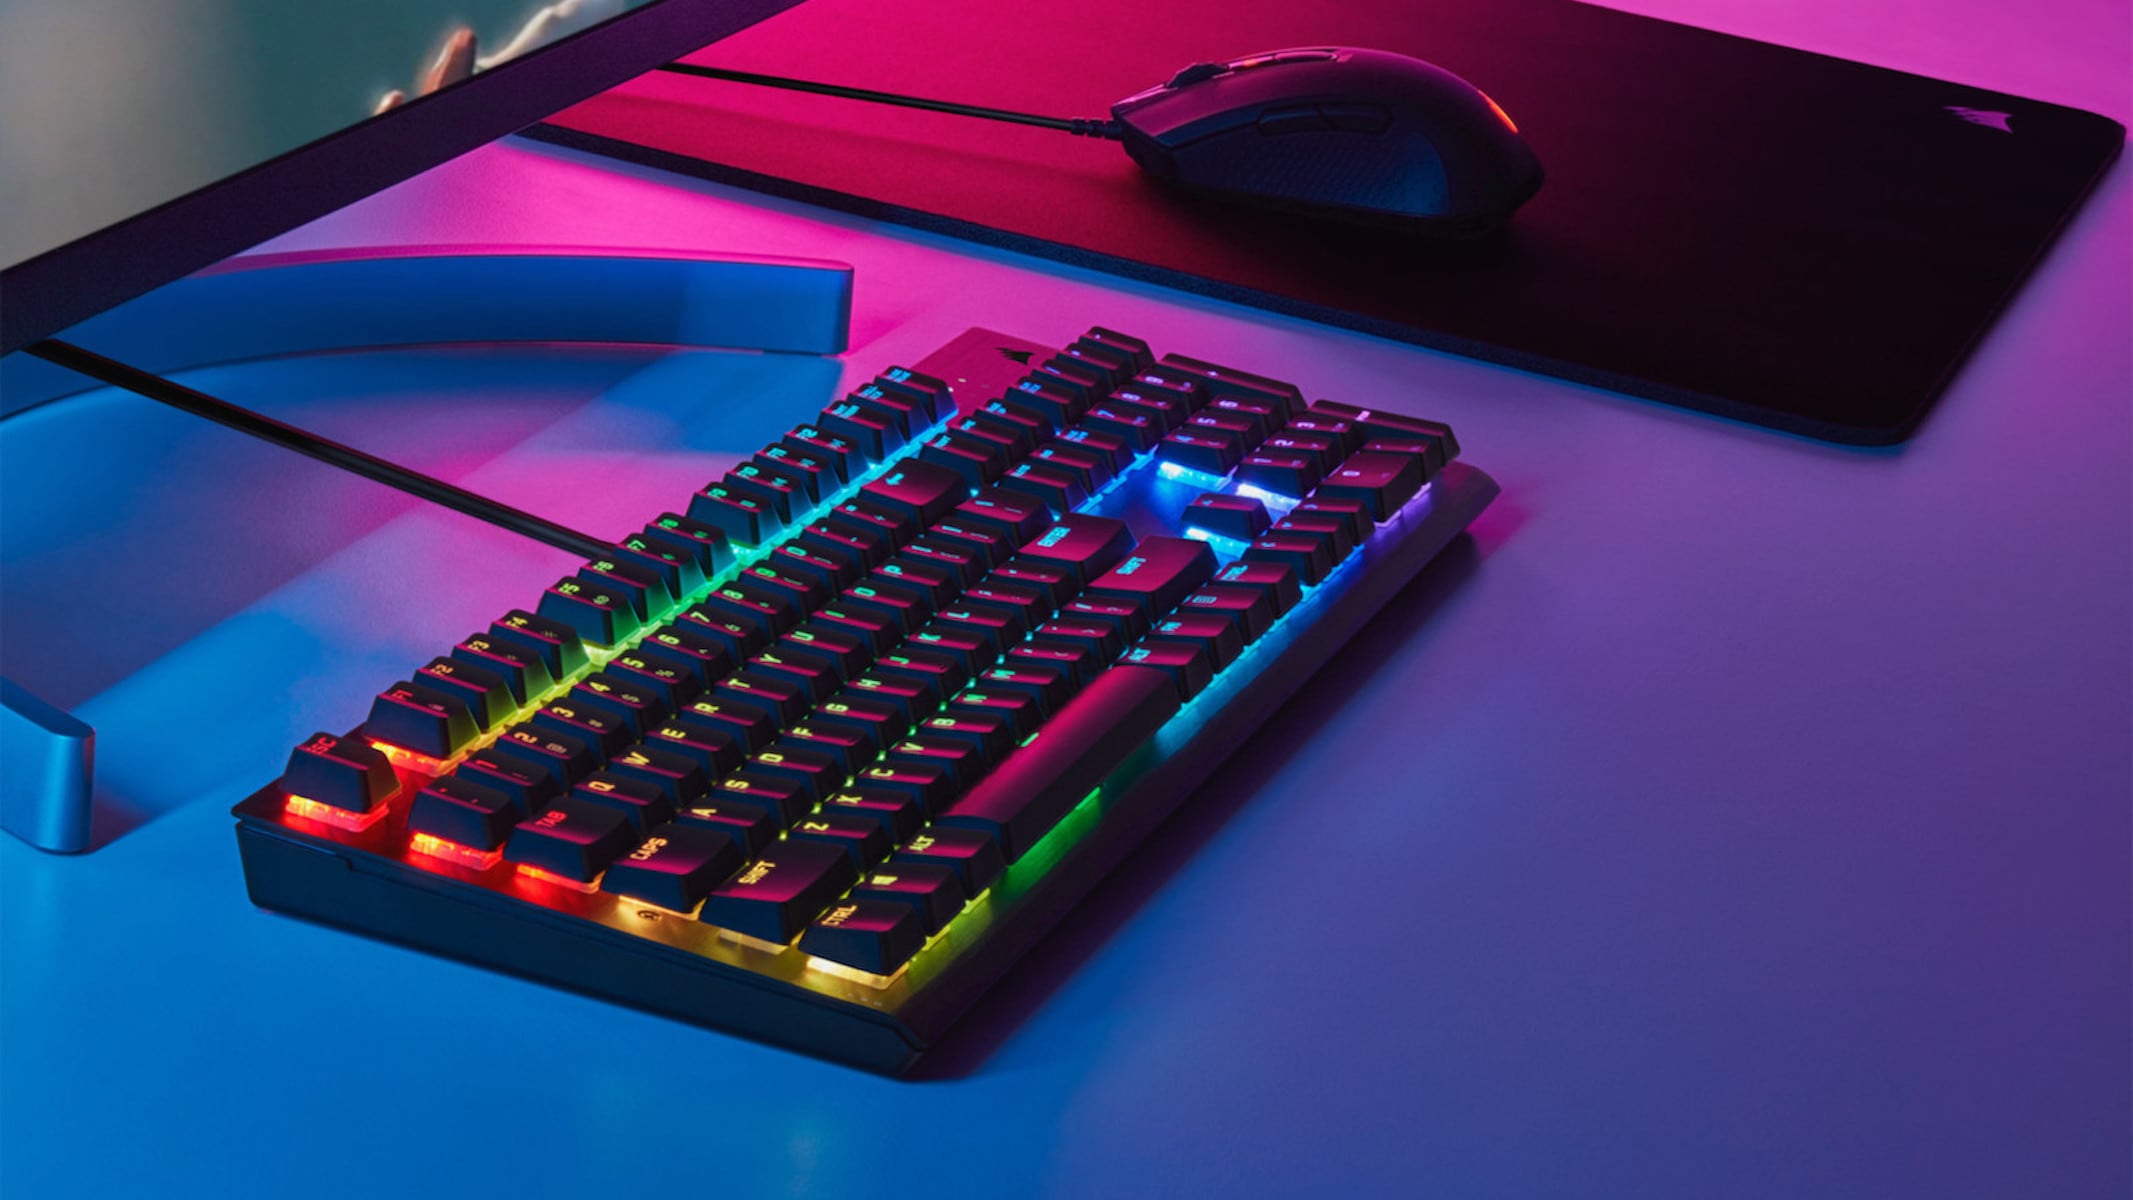 What Is The Best Gaming Keyboard In 2019